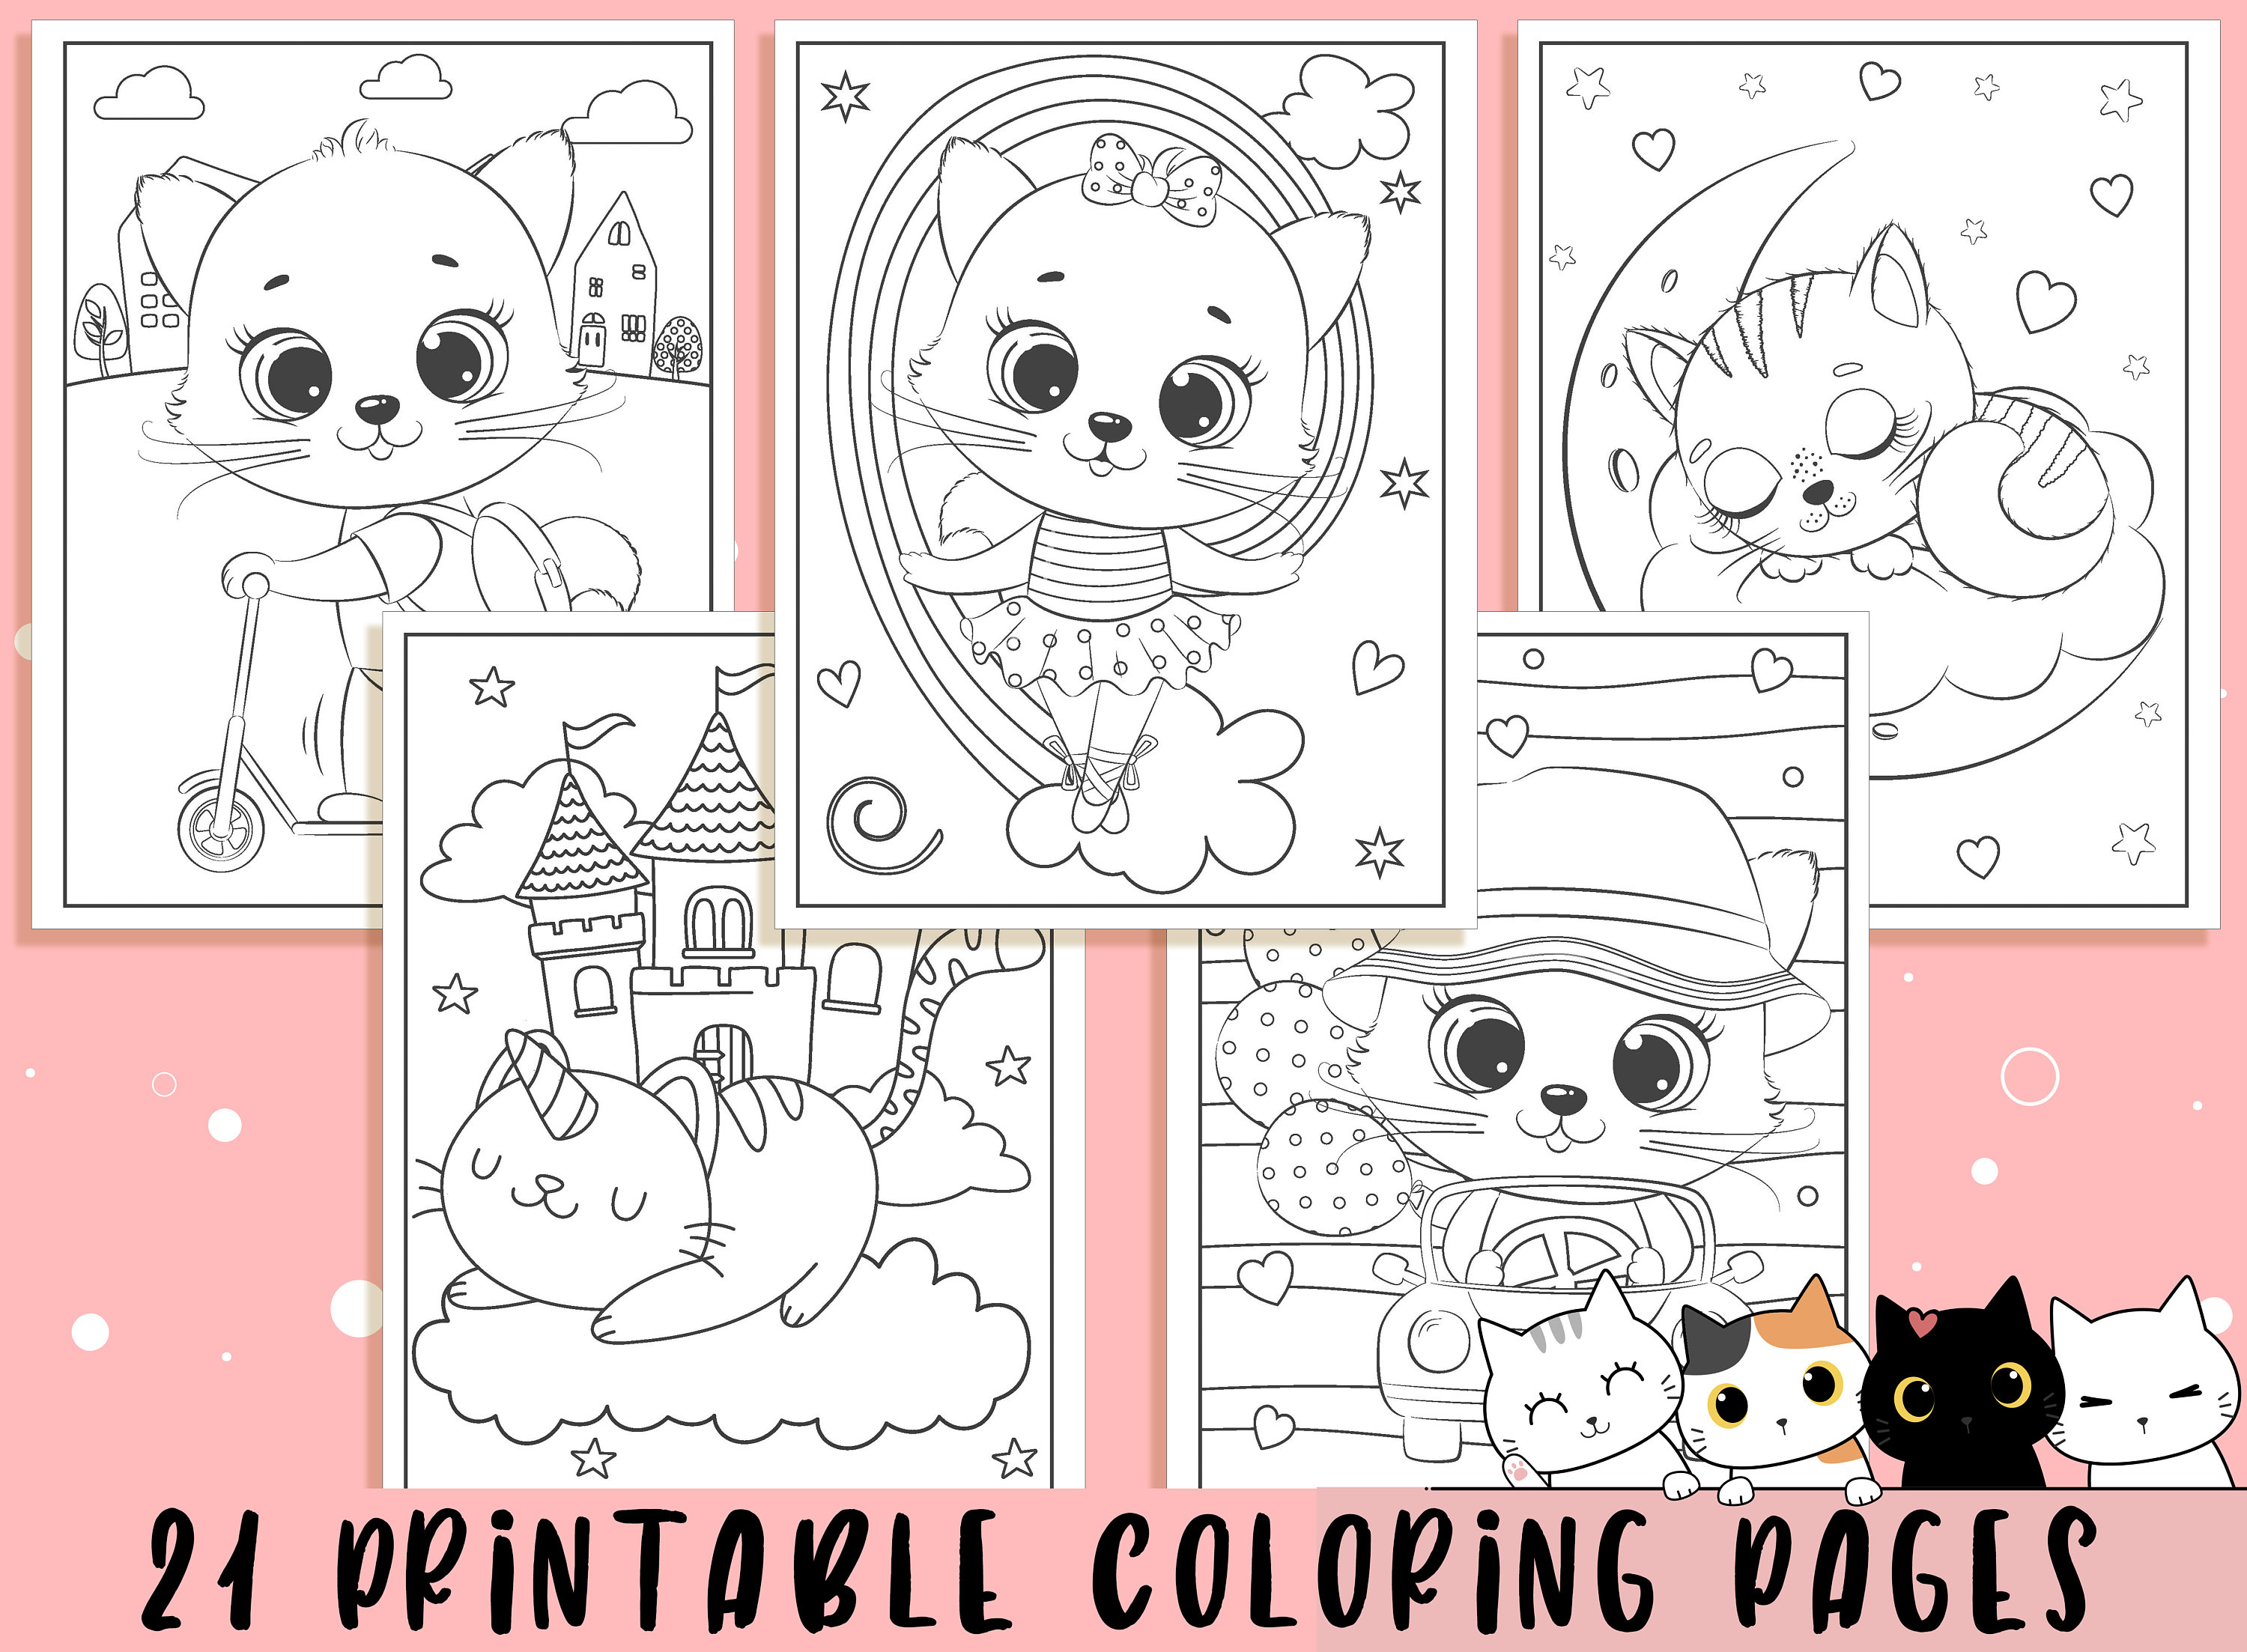 Kitten Coloring Pages 20 Printable Kitten Coloring Pages for   Etsy.de